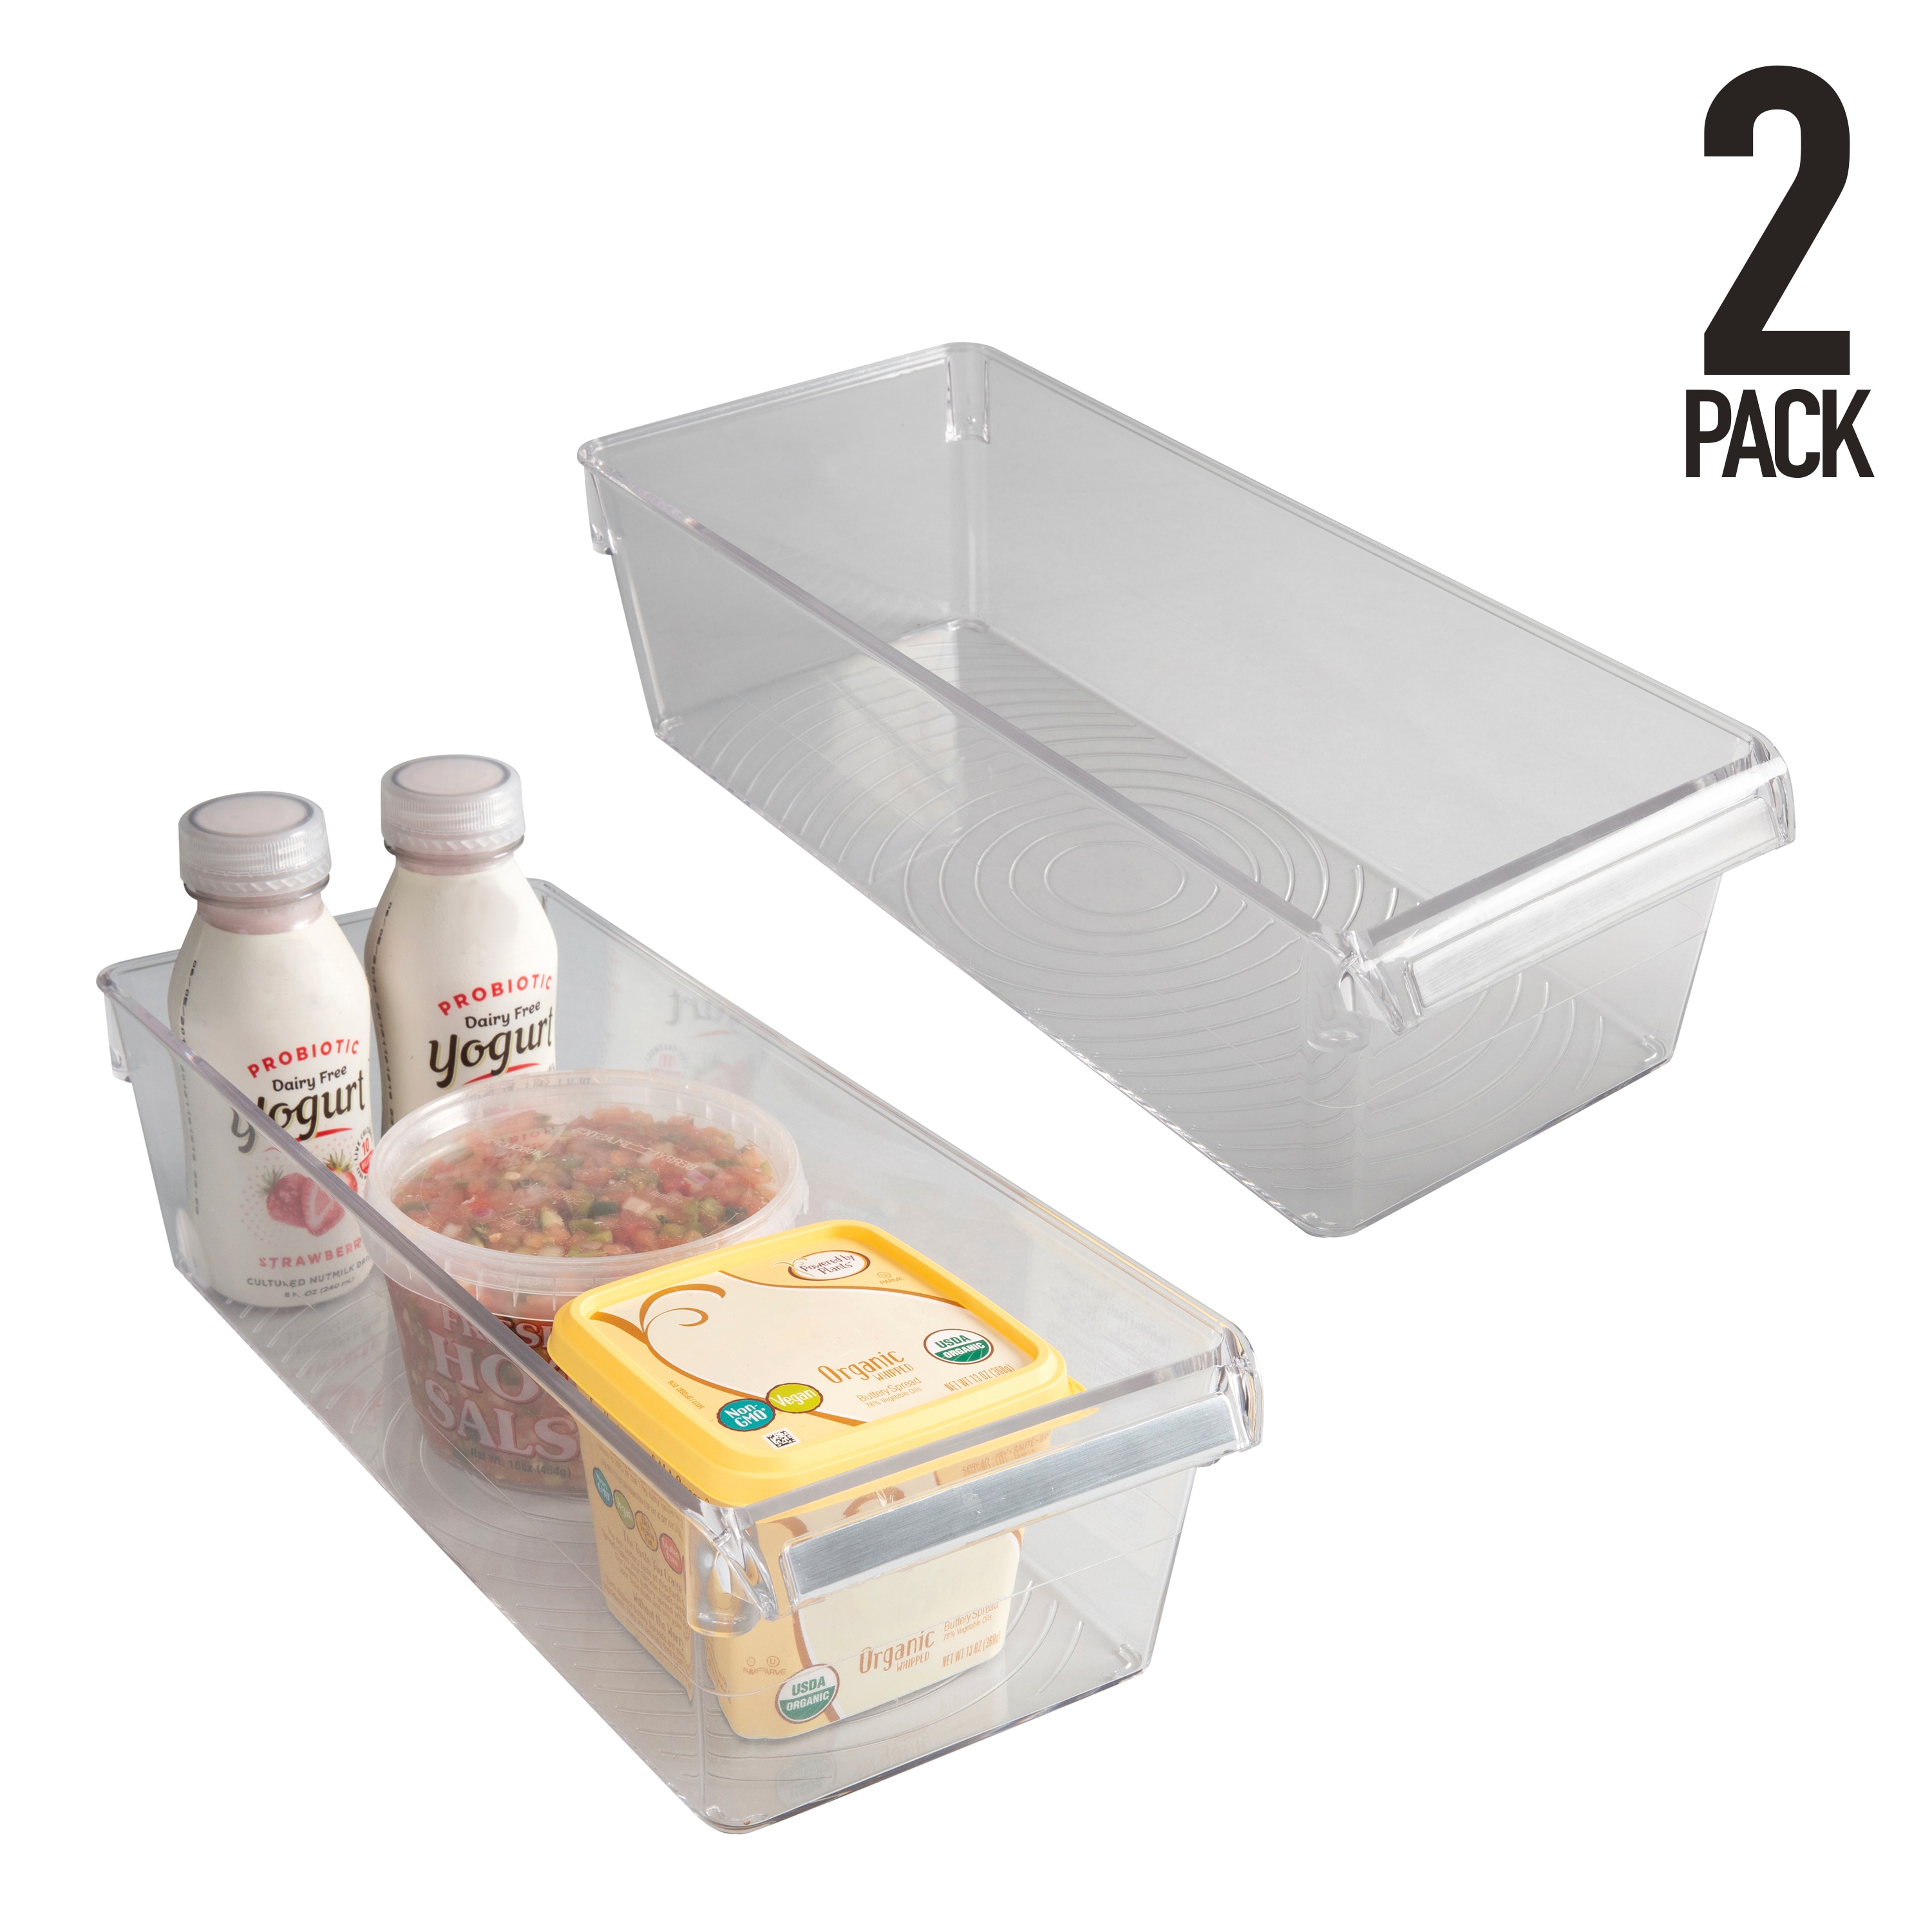 2 Compartment Food Storage Containers With Lids - Bpa Free